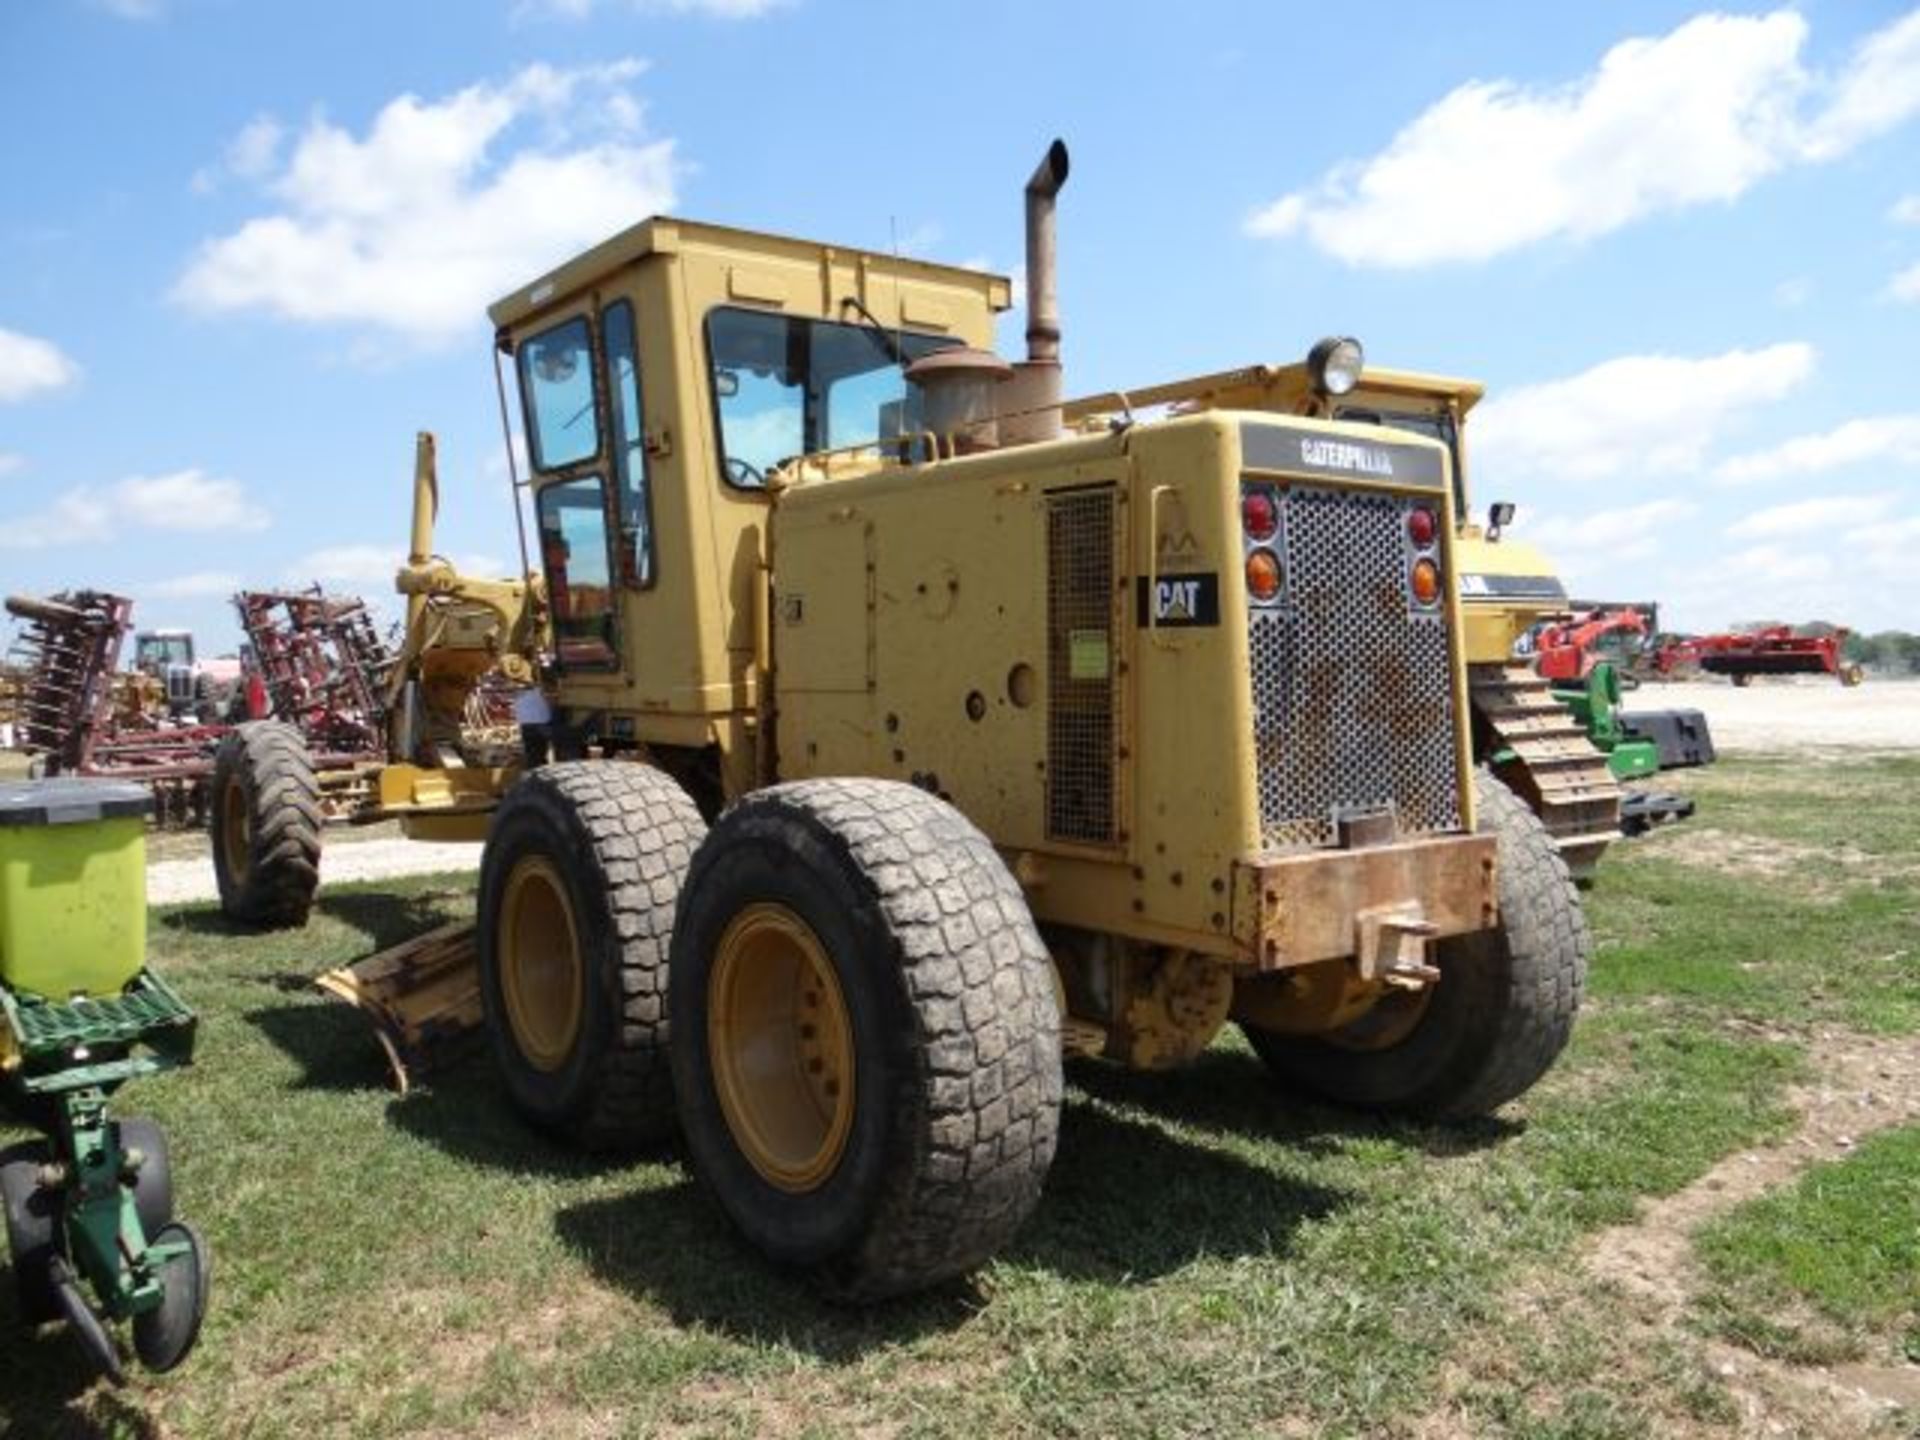 CAT 140G Road Grader, 1990 Approx 10,500 hrs, Tach has Been Replaced, One Owner, Starts and Runs - Image 3 of 3